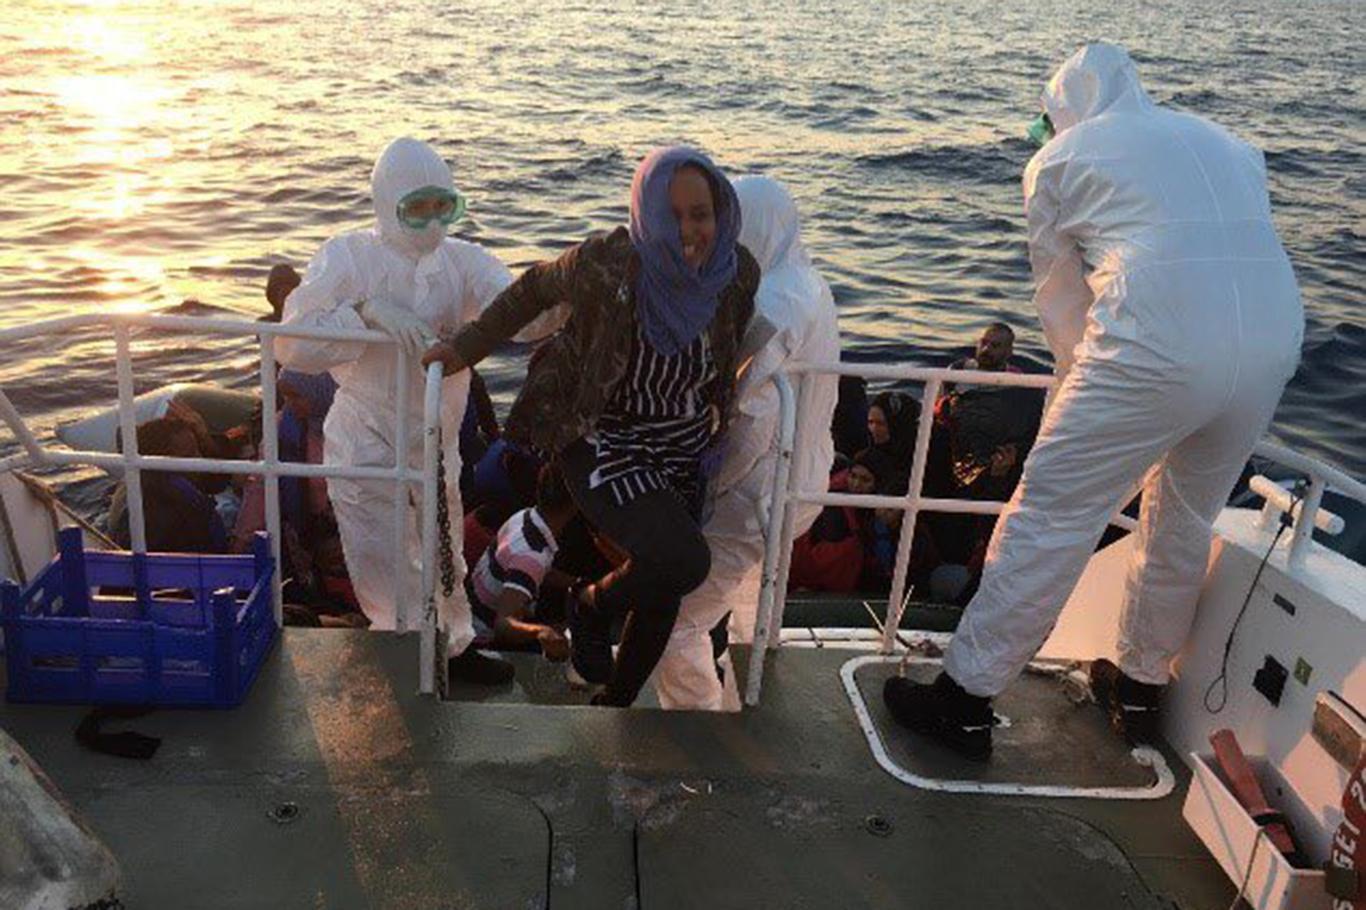 A total of 554 irregular migrants rescued in the last week, Turkish Coast Guard says